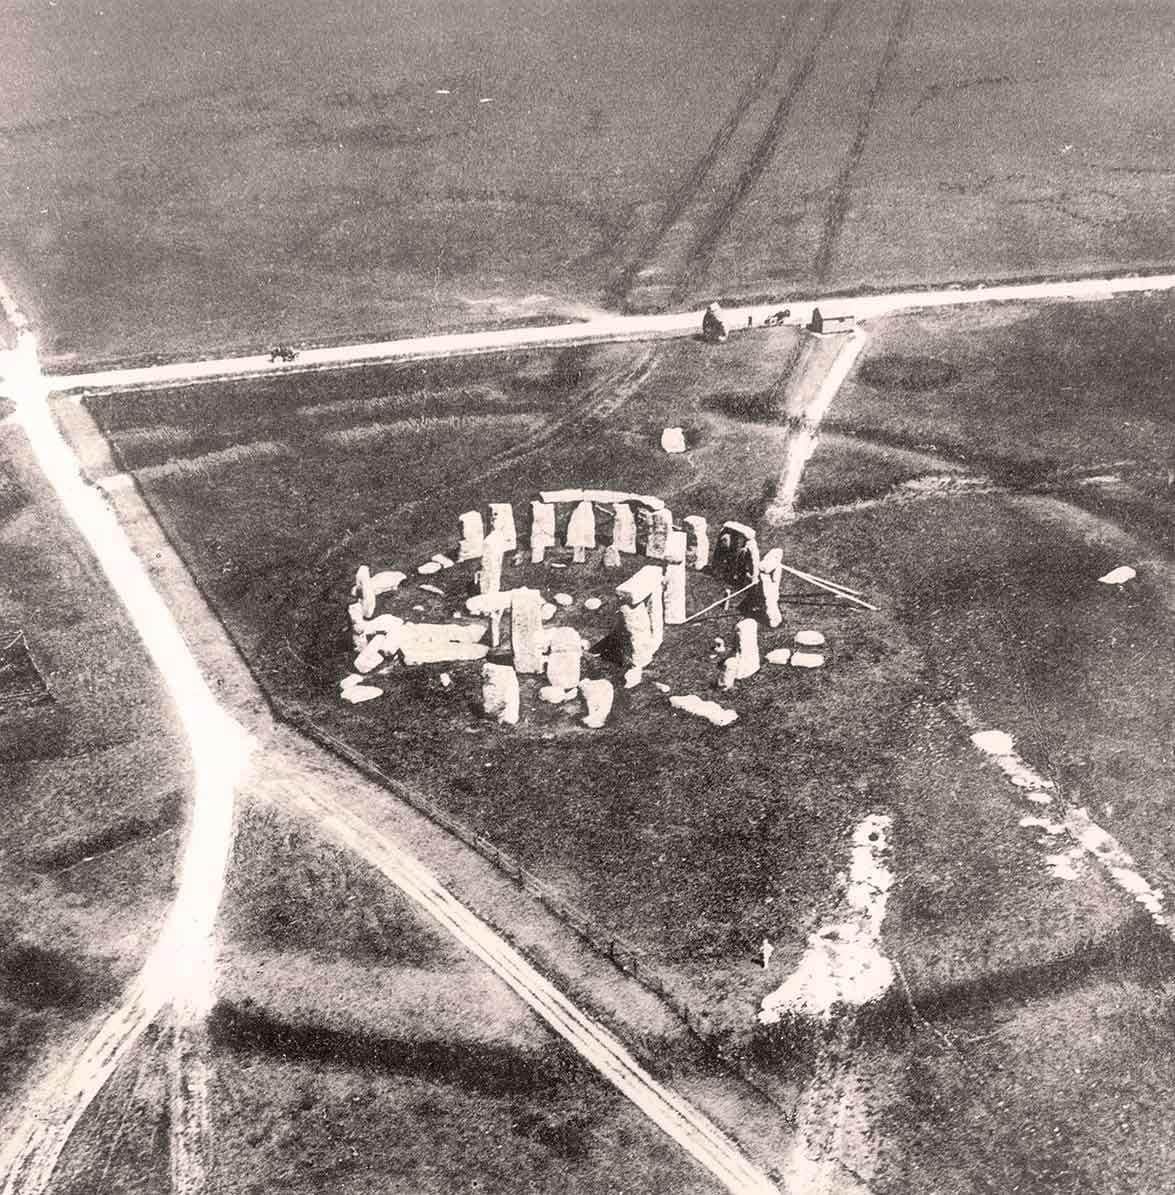 Image of stonehenge from the air by philip henry sharpe in 1906